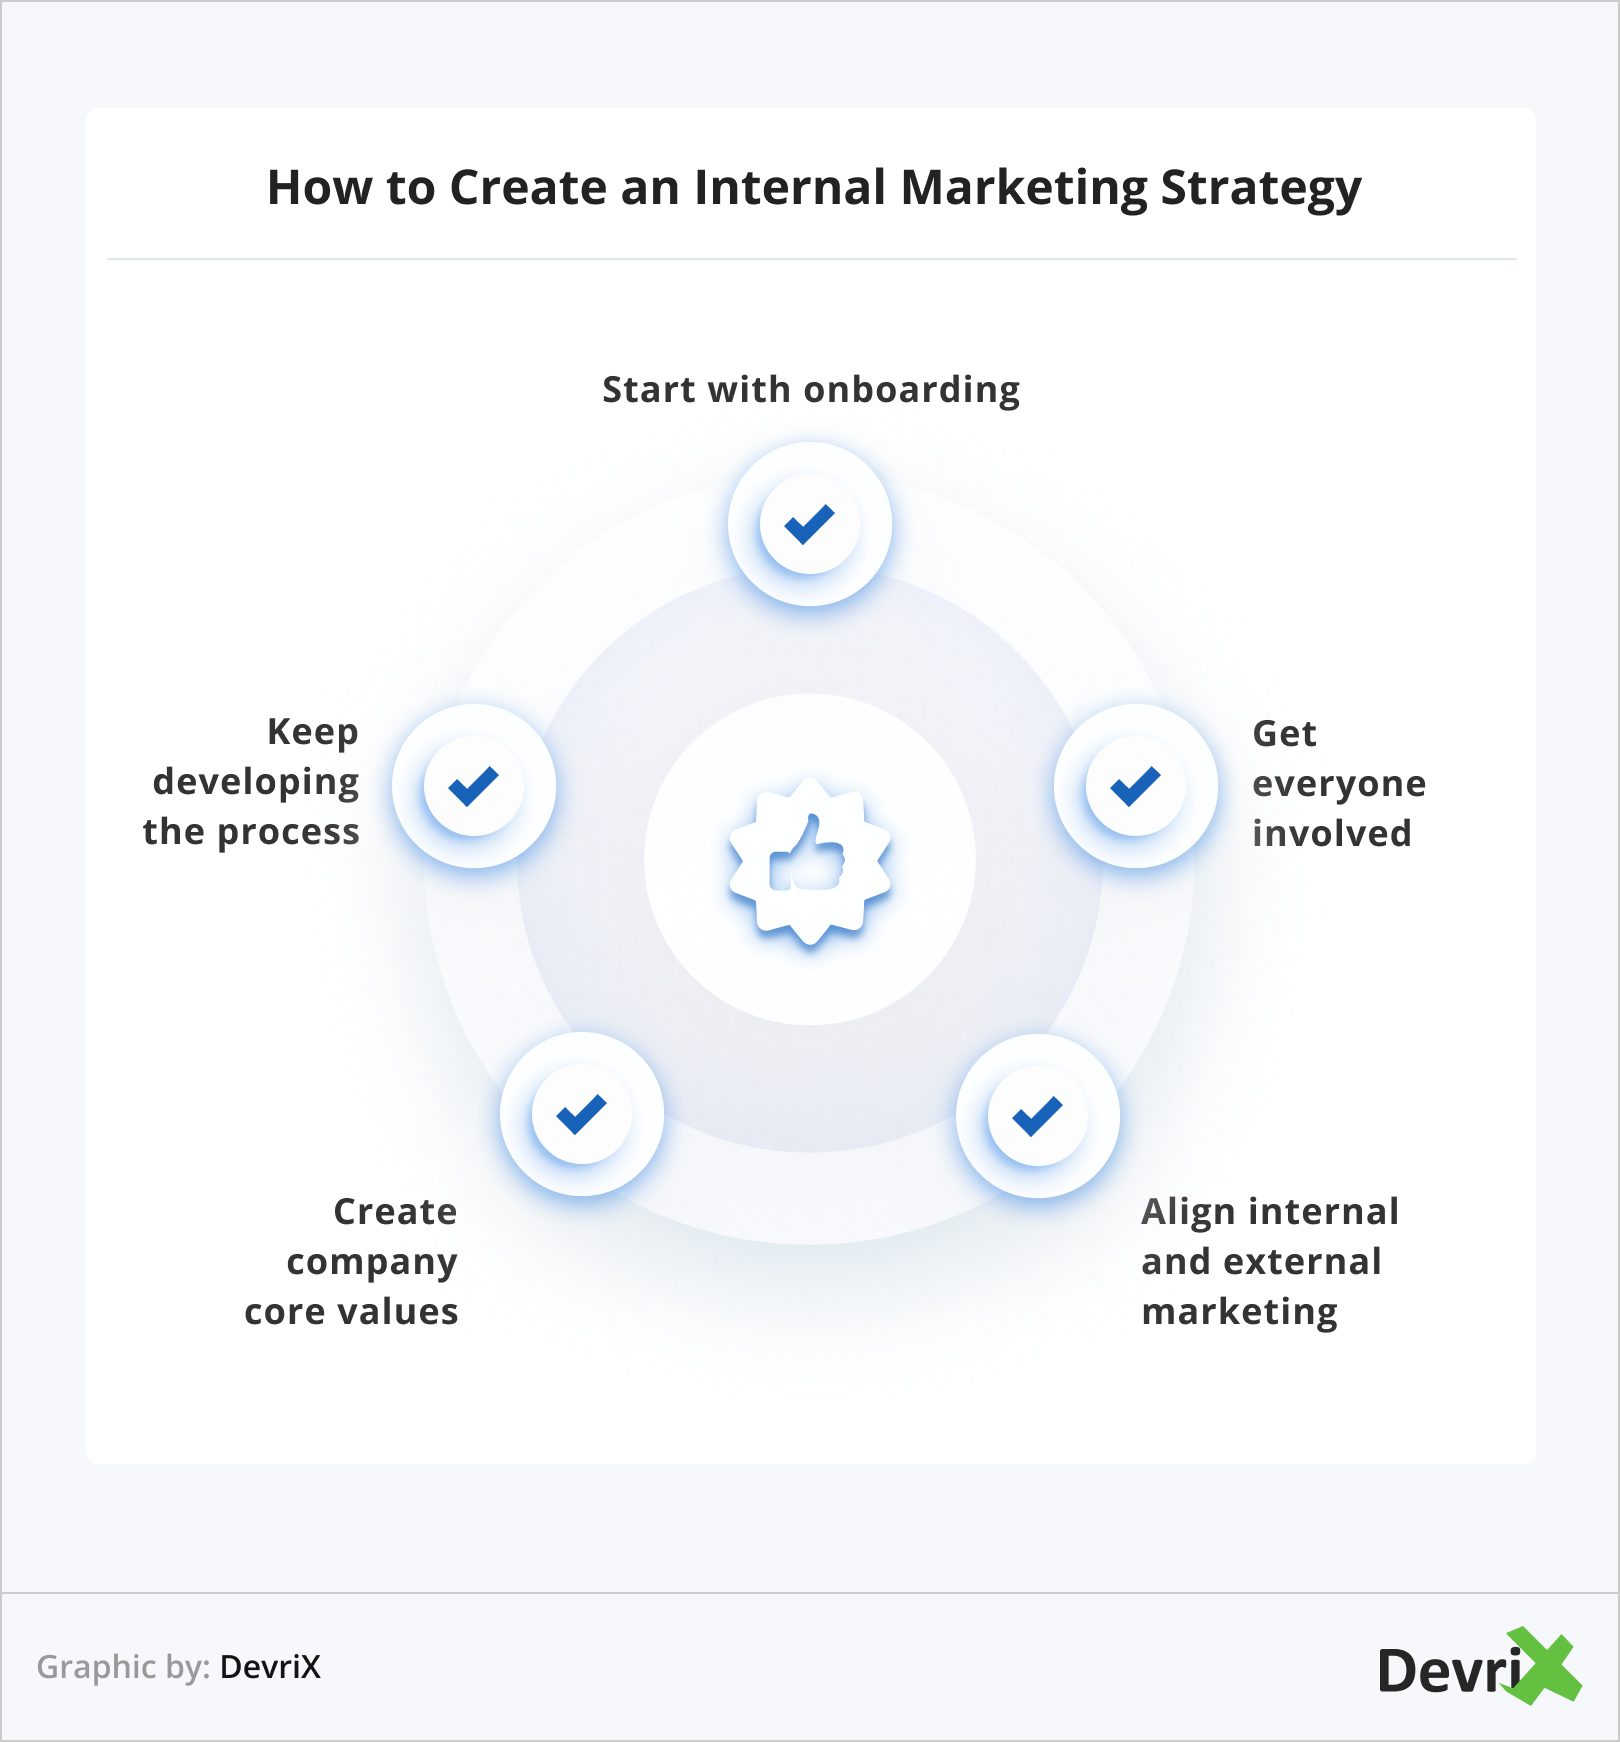 How to Create an Internal Marketing Strategy